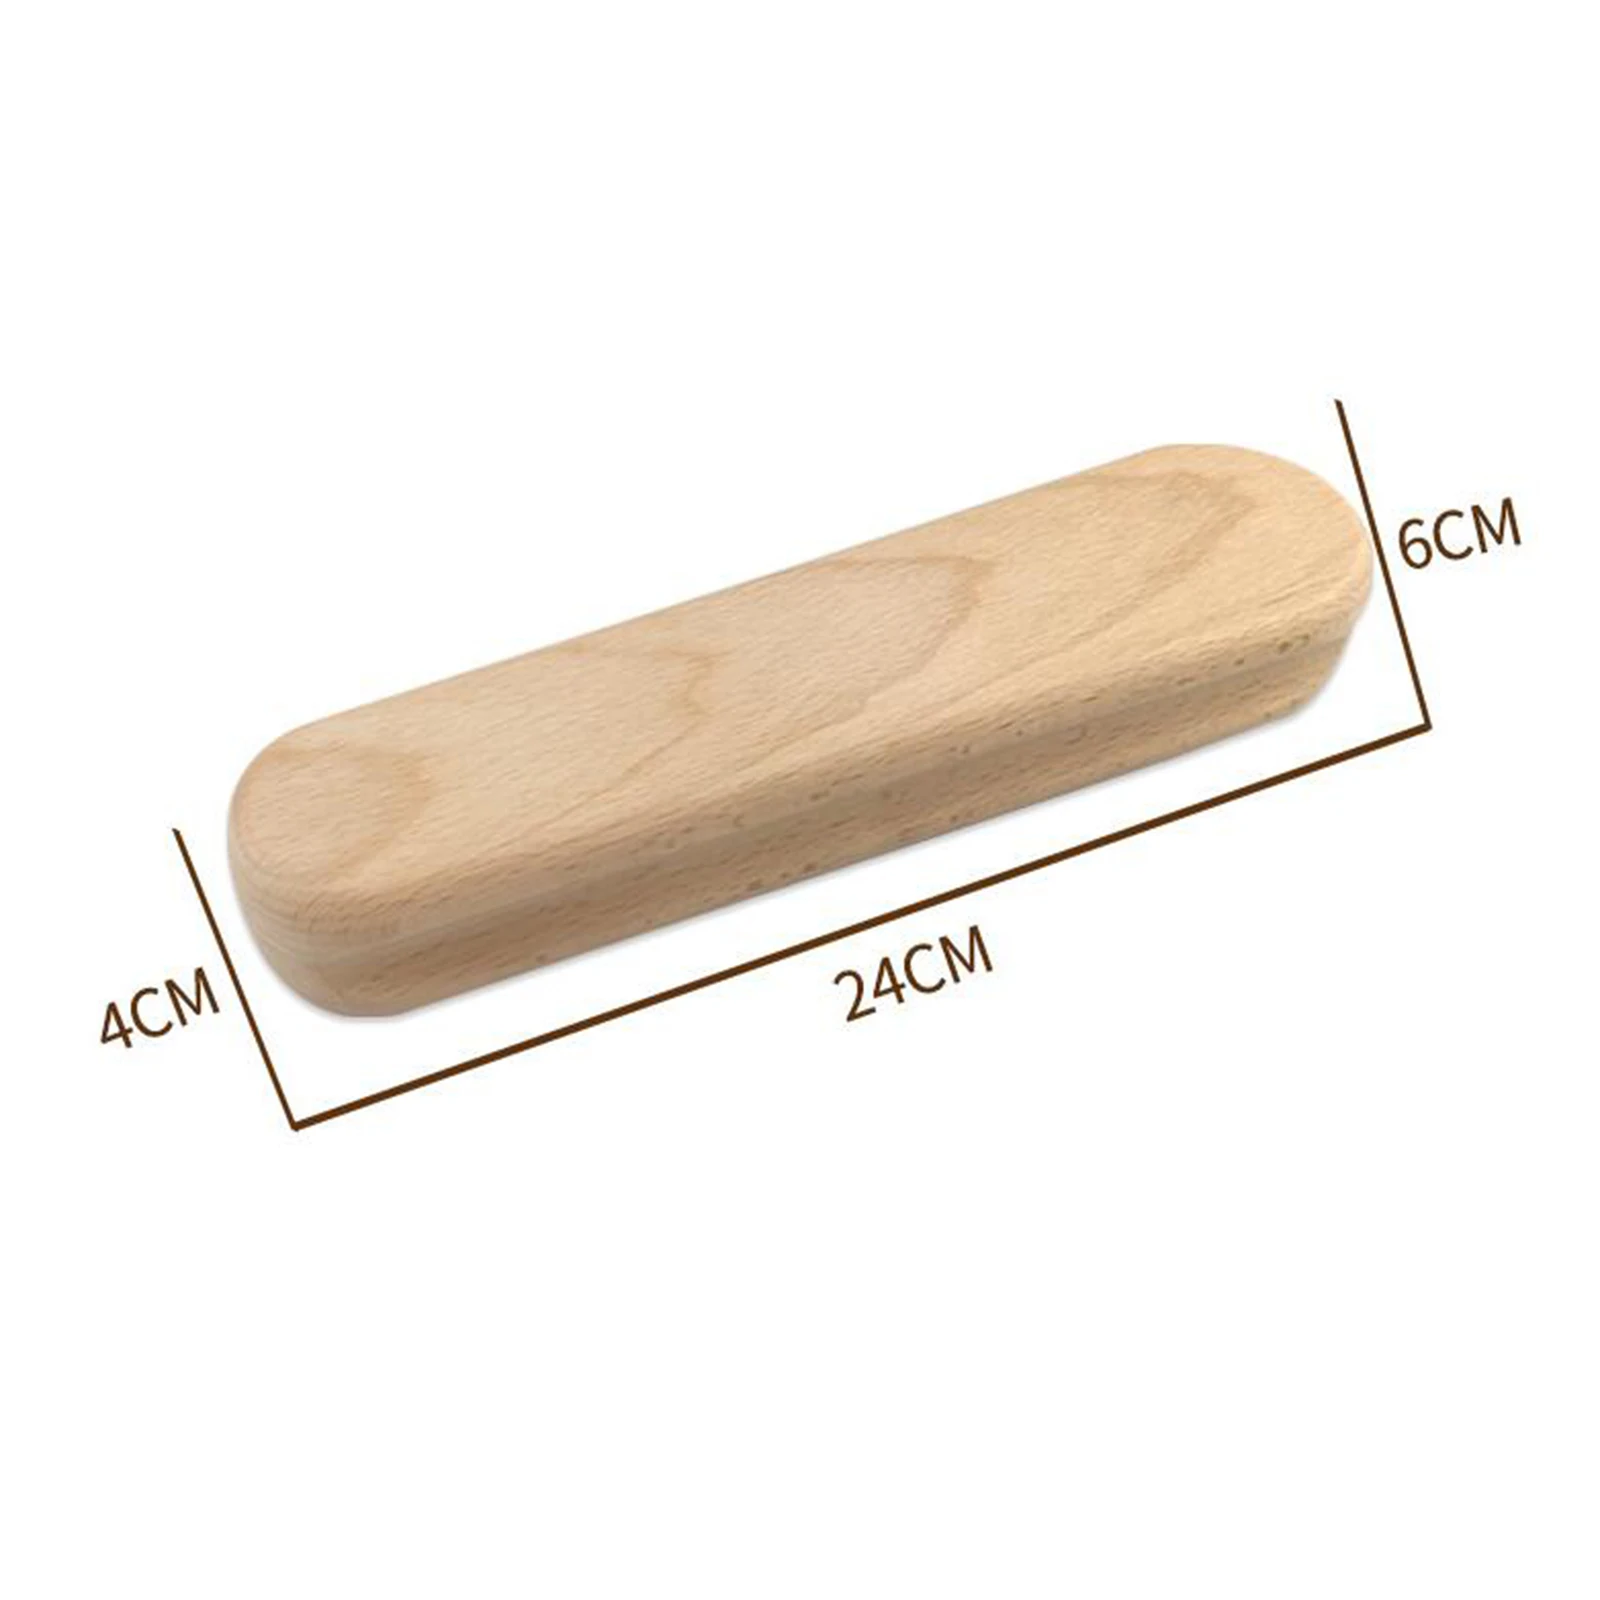 Wooden Tailors Clapper Large Handheld Seam Flattening Tool 24cm  Professional Clapper For Sewing Ironing Embroidery Quilting